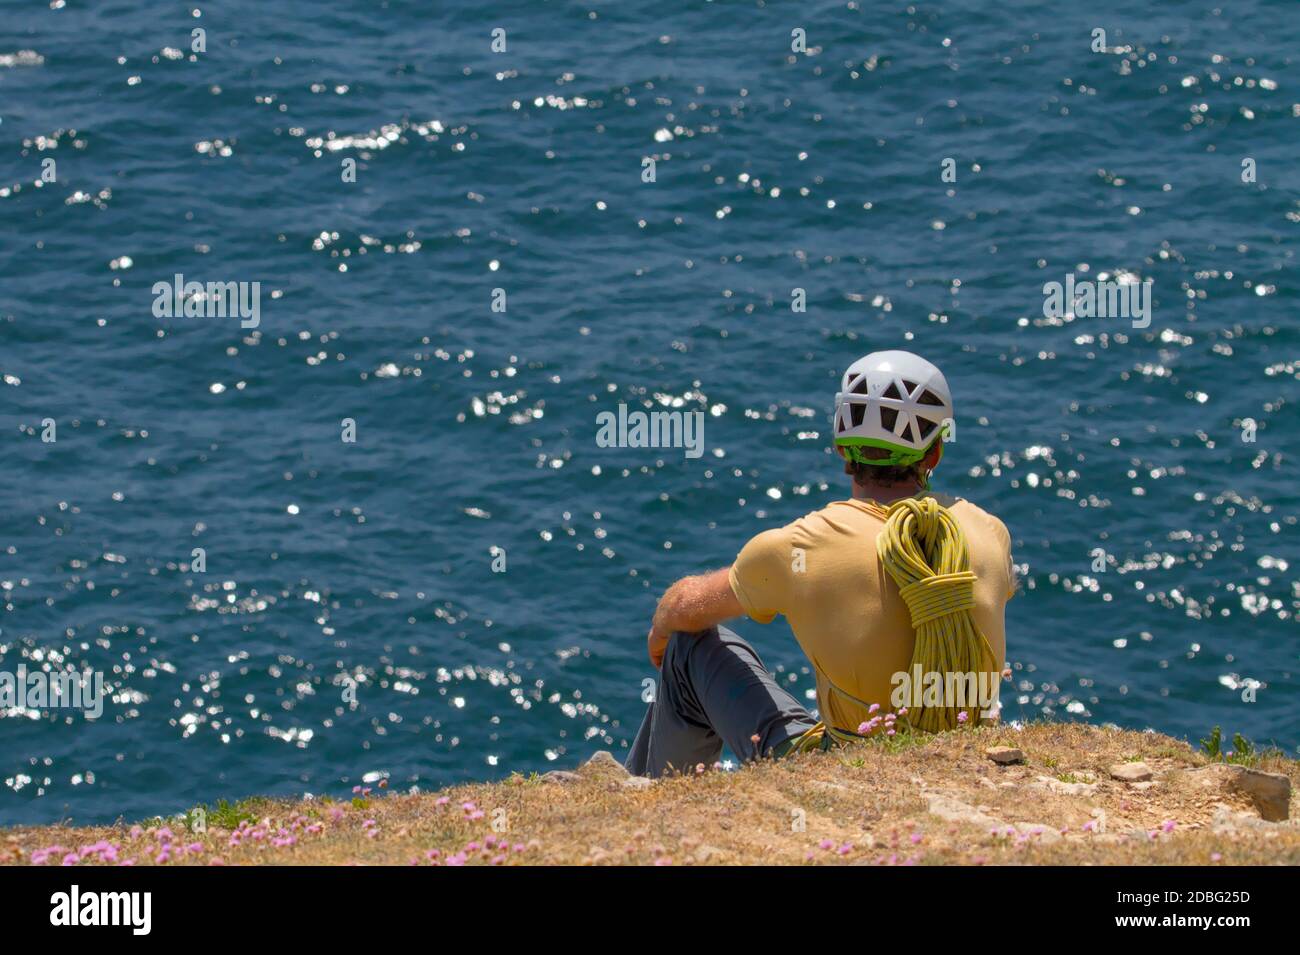 Rock climber In Helmet With Rope On Back Sitting On A Cliff Top Staring Out To Sea Contemplating The Next Climb, Durlston Swanage UK Stock Photo